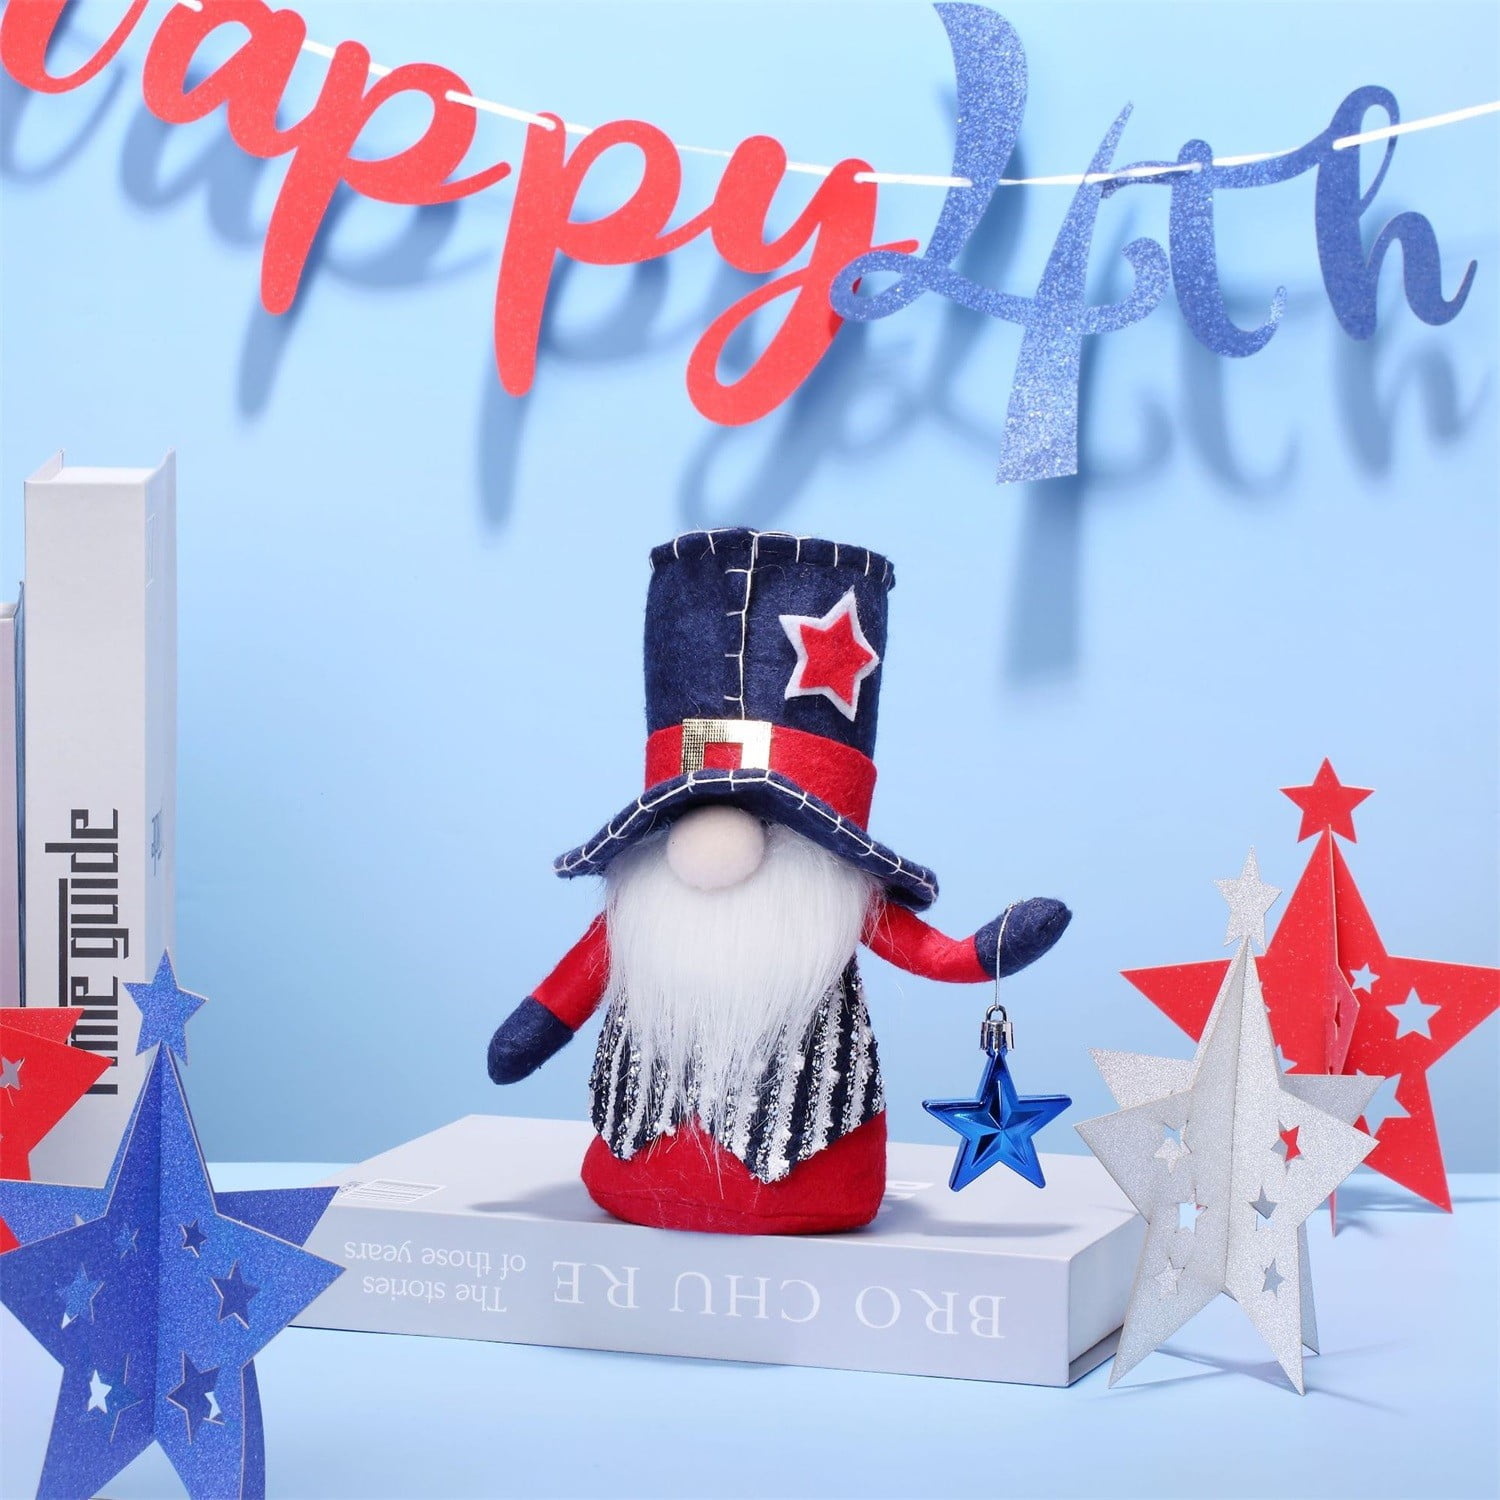 Ympuoqn 4th of July Decorations on Clearance!On July 4 2024